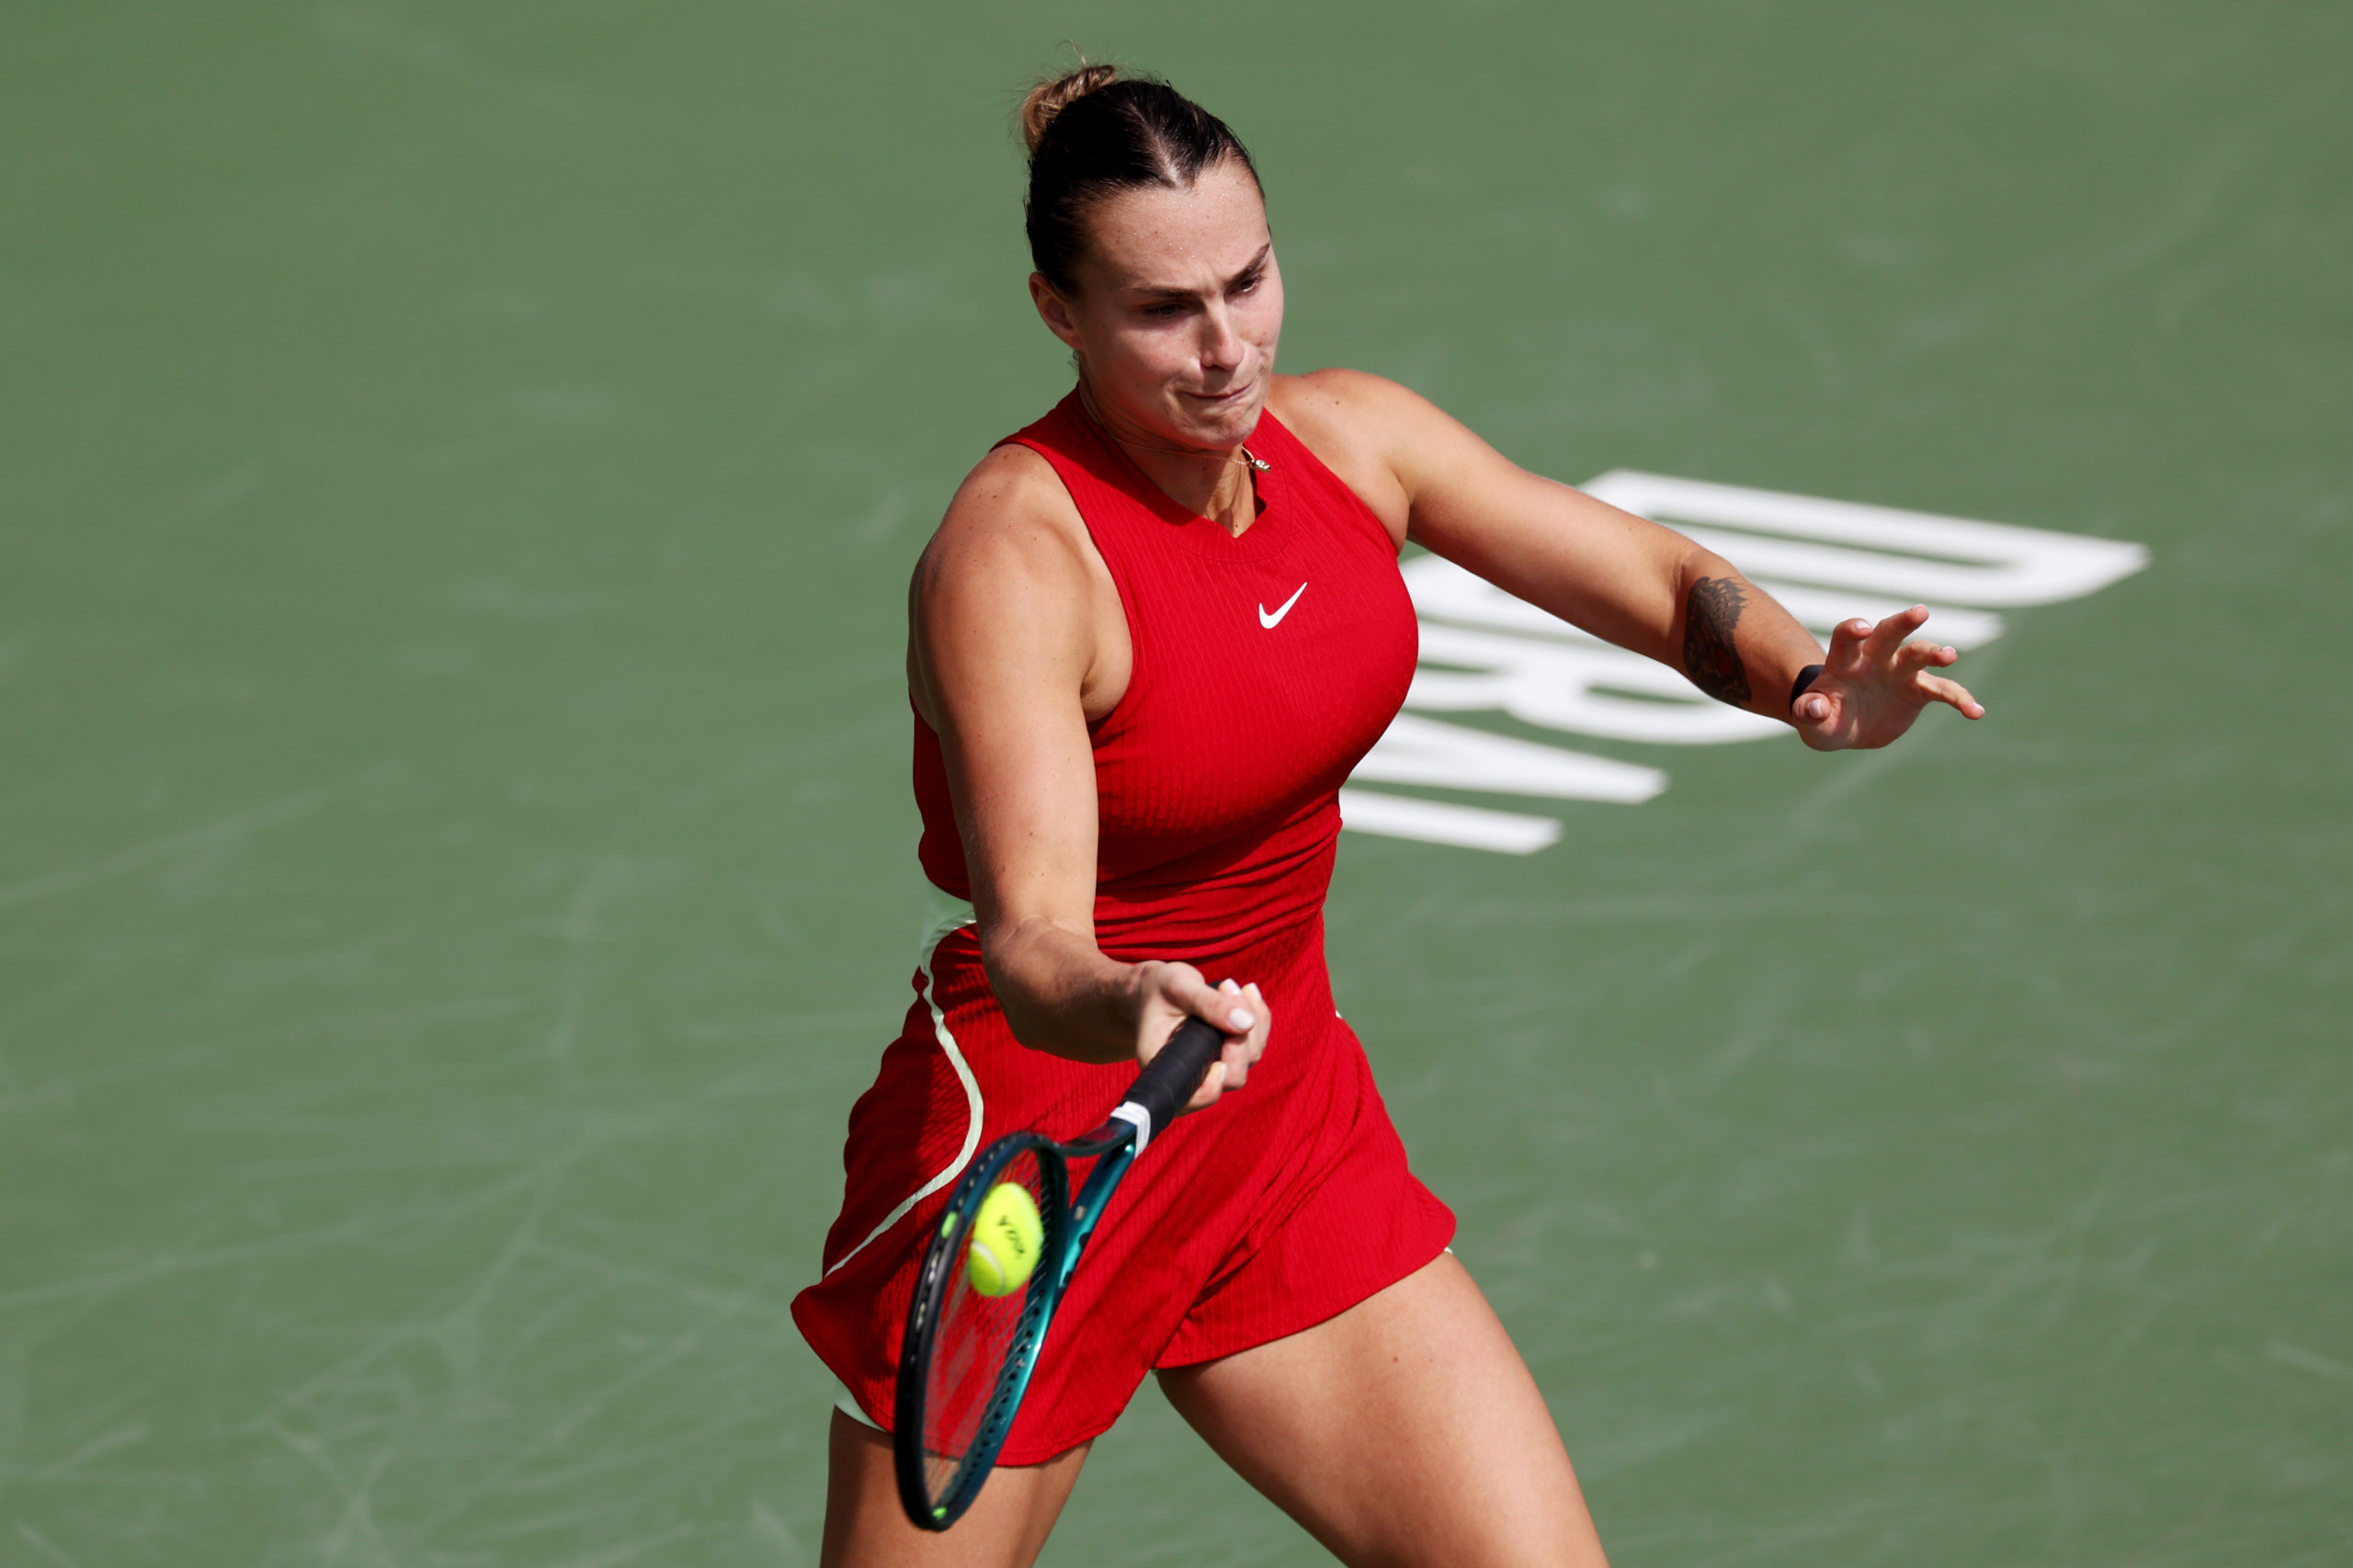 DUBAI, UNITED ARAB EMIRATES - FEBRUARY 20: Aryna Sabalenka plays a forehand against Donna Vekic of Croatia in their second round women's singles match during the Dubai Duty Free Tennis Championships, part of the Hologic WTA Tour at Dubai Duty Free Tennis Stadium on February 20, 2024 in Dubai, United Arab Emirates. Christopher Pike/Getty Images